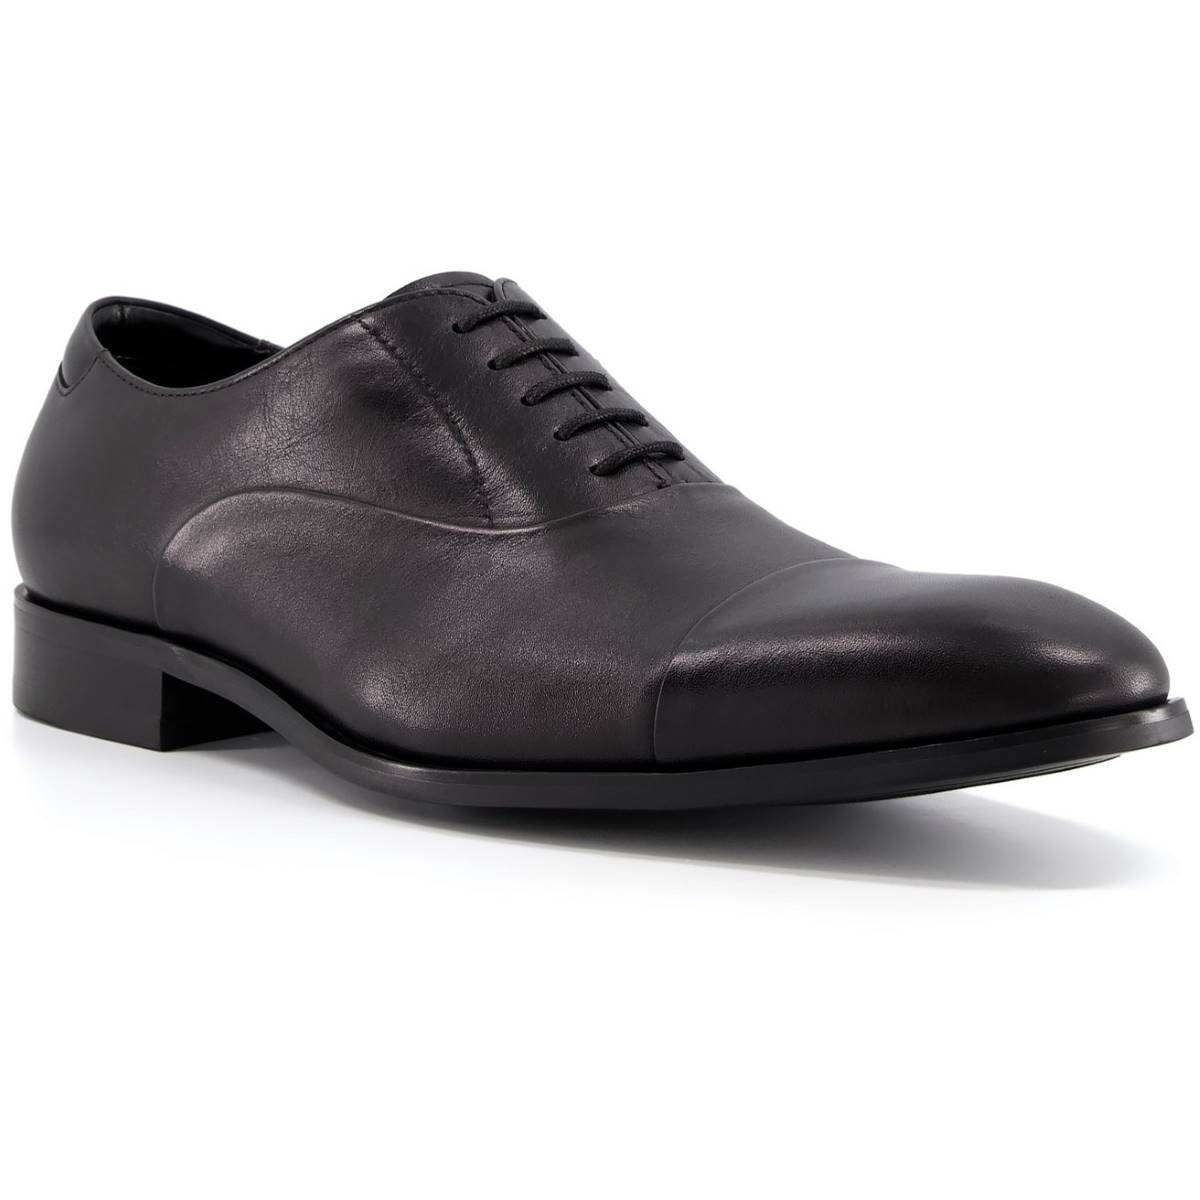 Dune London Secrecy Black Mens formal shoes 629509520019484 in a Plain Leather in Size 11